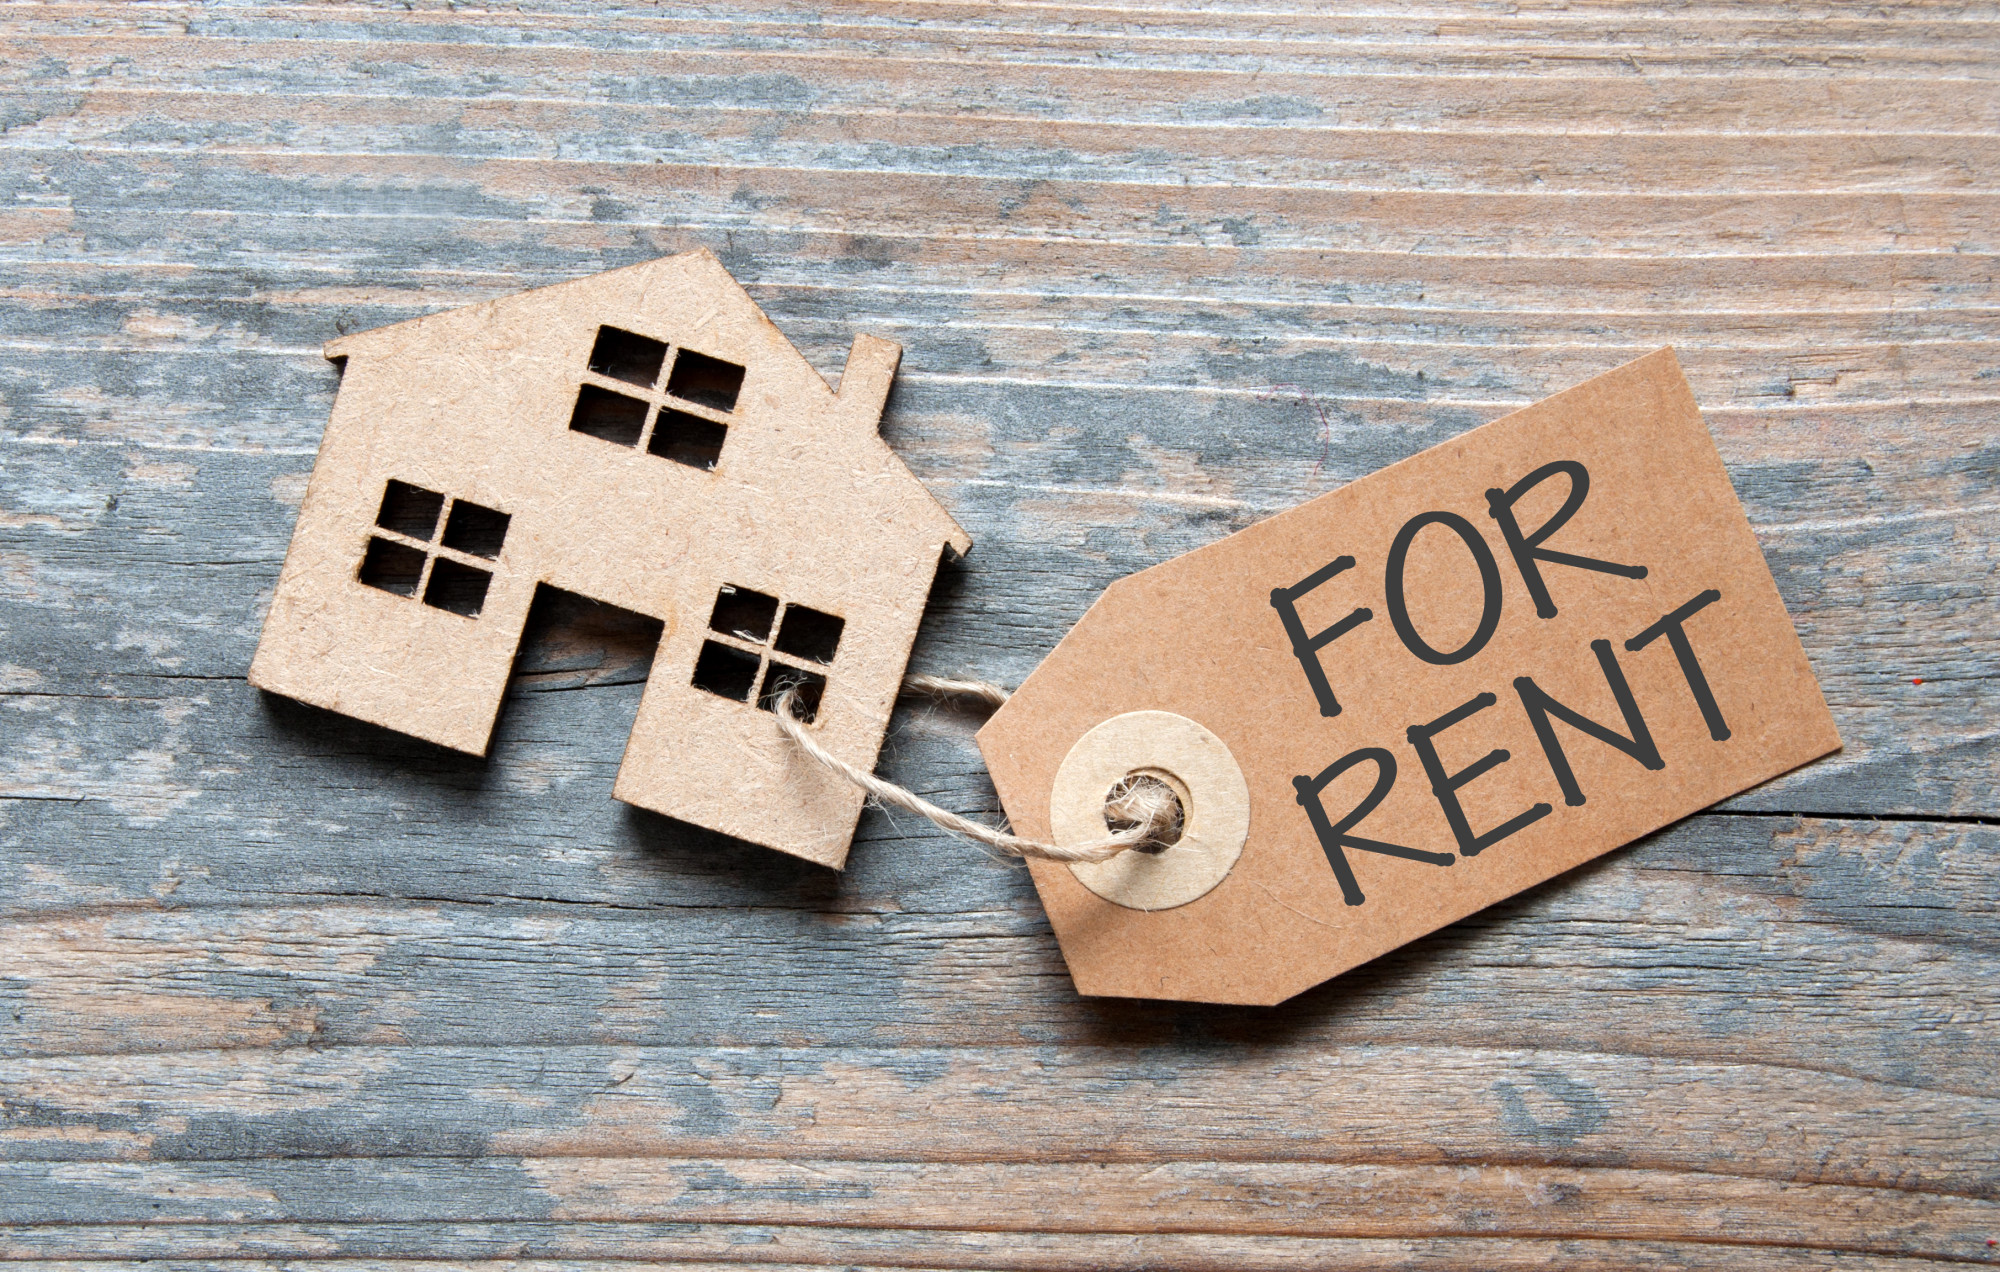 New to Renting? Here's What You Need to Know as a First-Time Renter